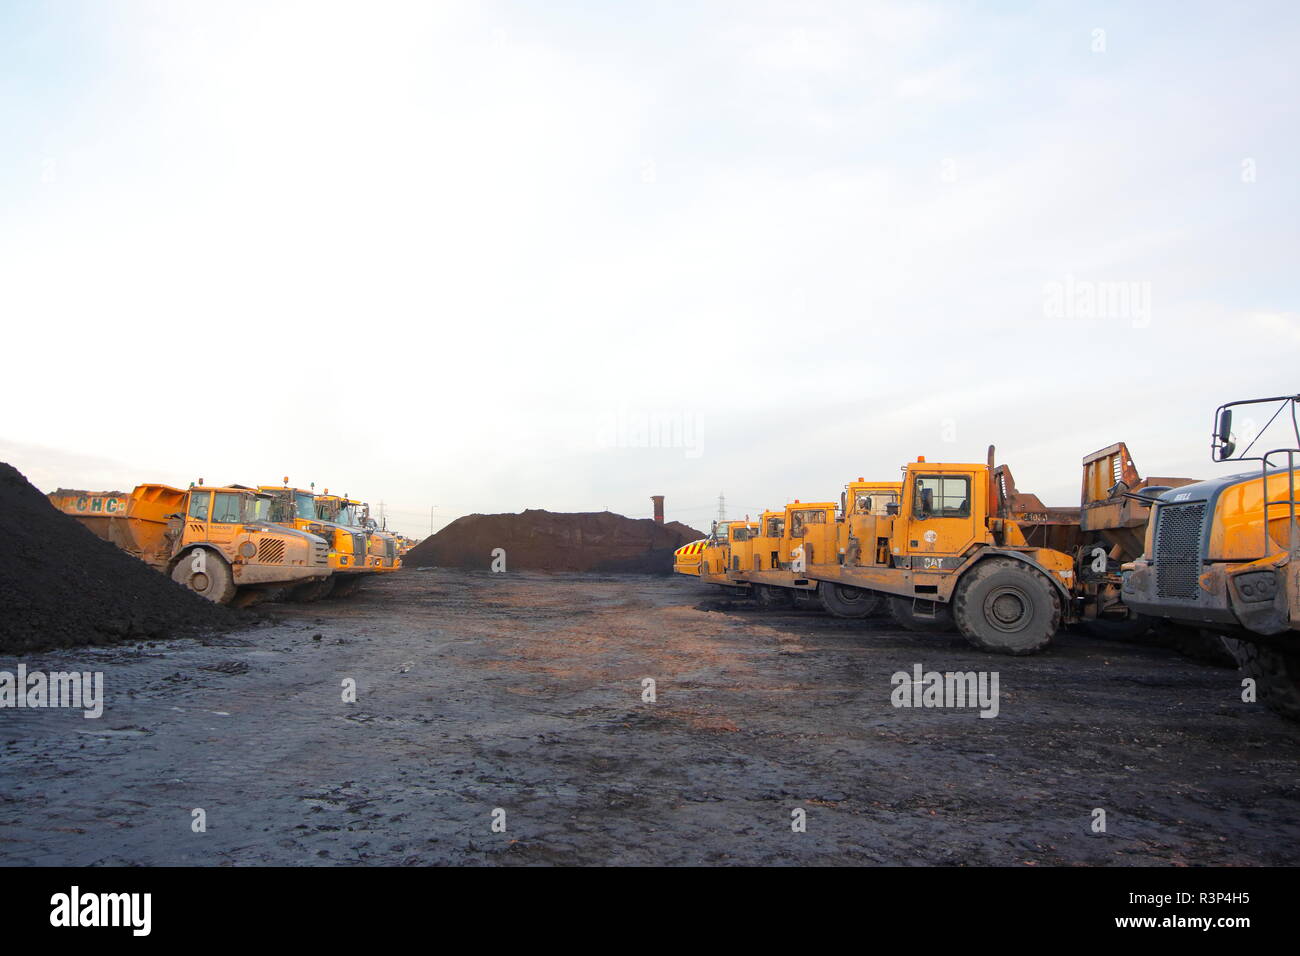 A variety of articulated dump trucks on the Recycoal Coal Recycling Plant in Rossington,Doncaster which has now been demolished to build new homes. Stock Photo